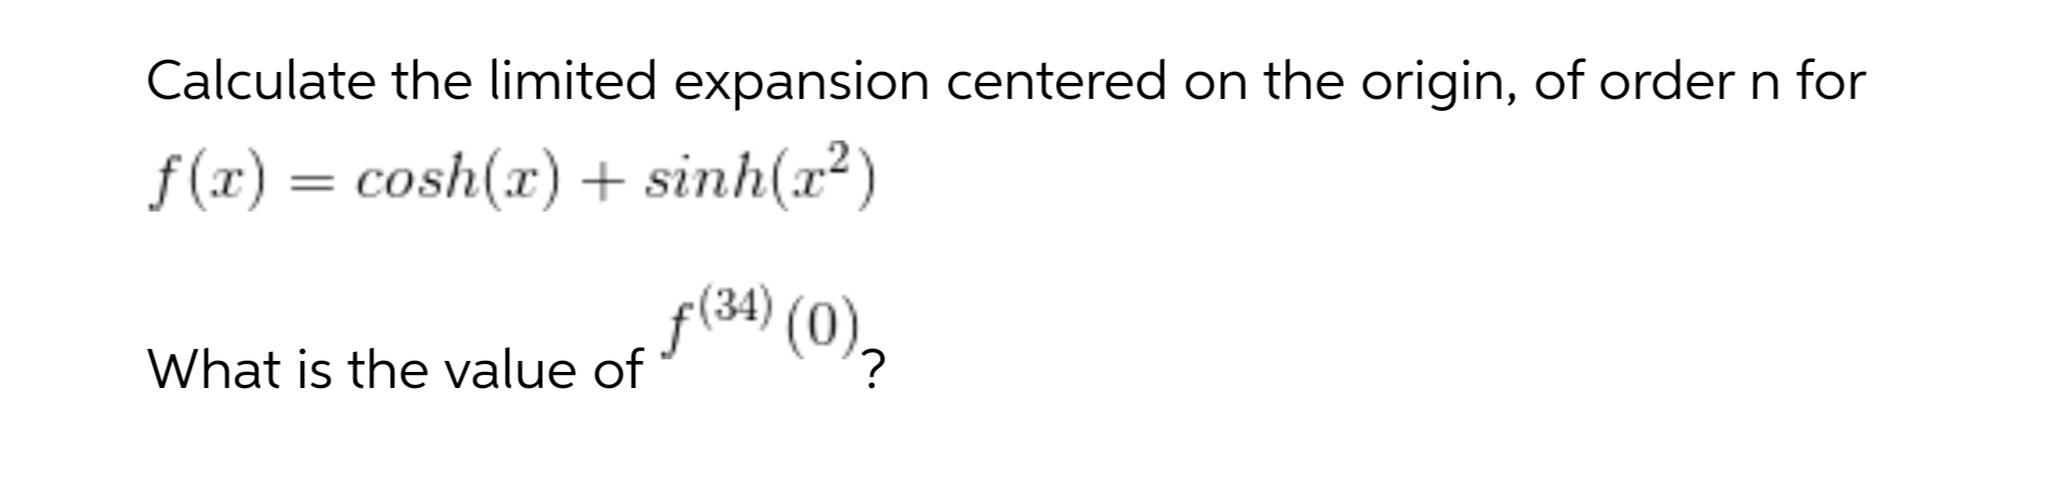 Calculate the limited expansion centered on the origin, of order n for
f(x) = cosh(x) + sinh(x²)
f(34) (0),
What is the value of
